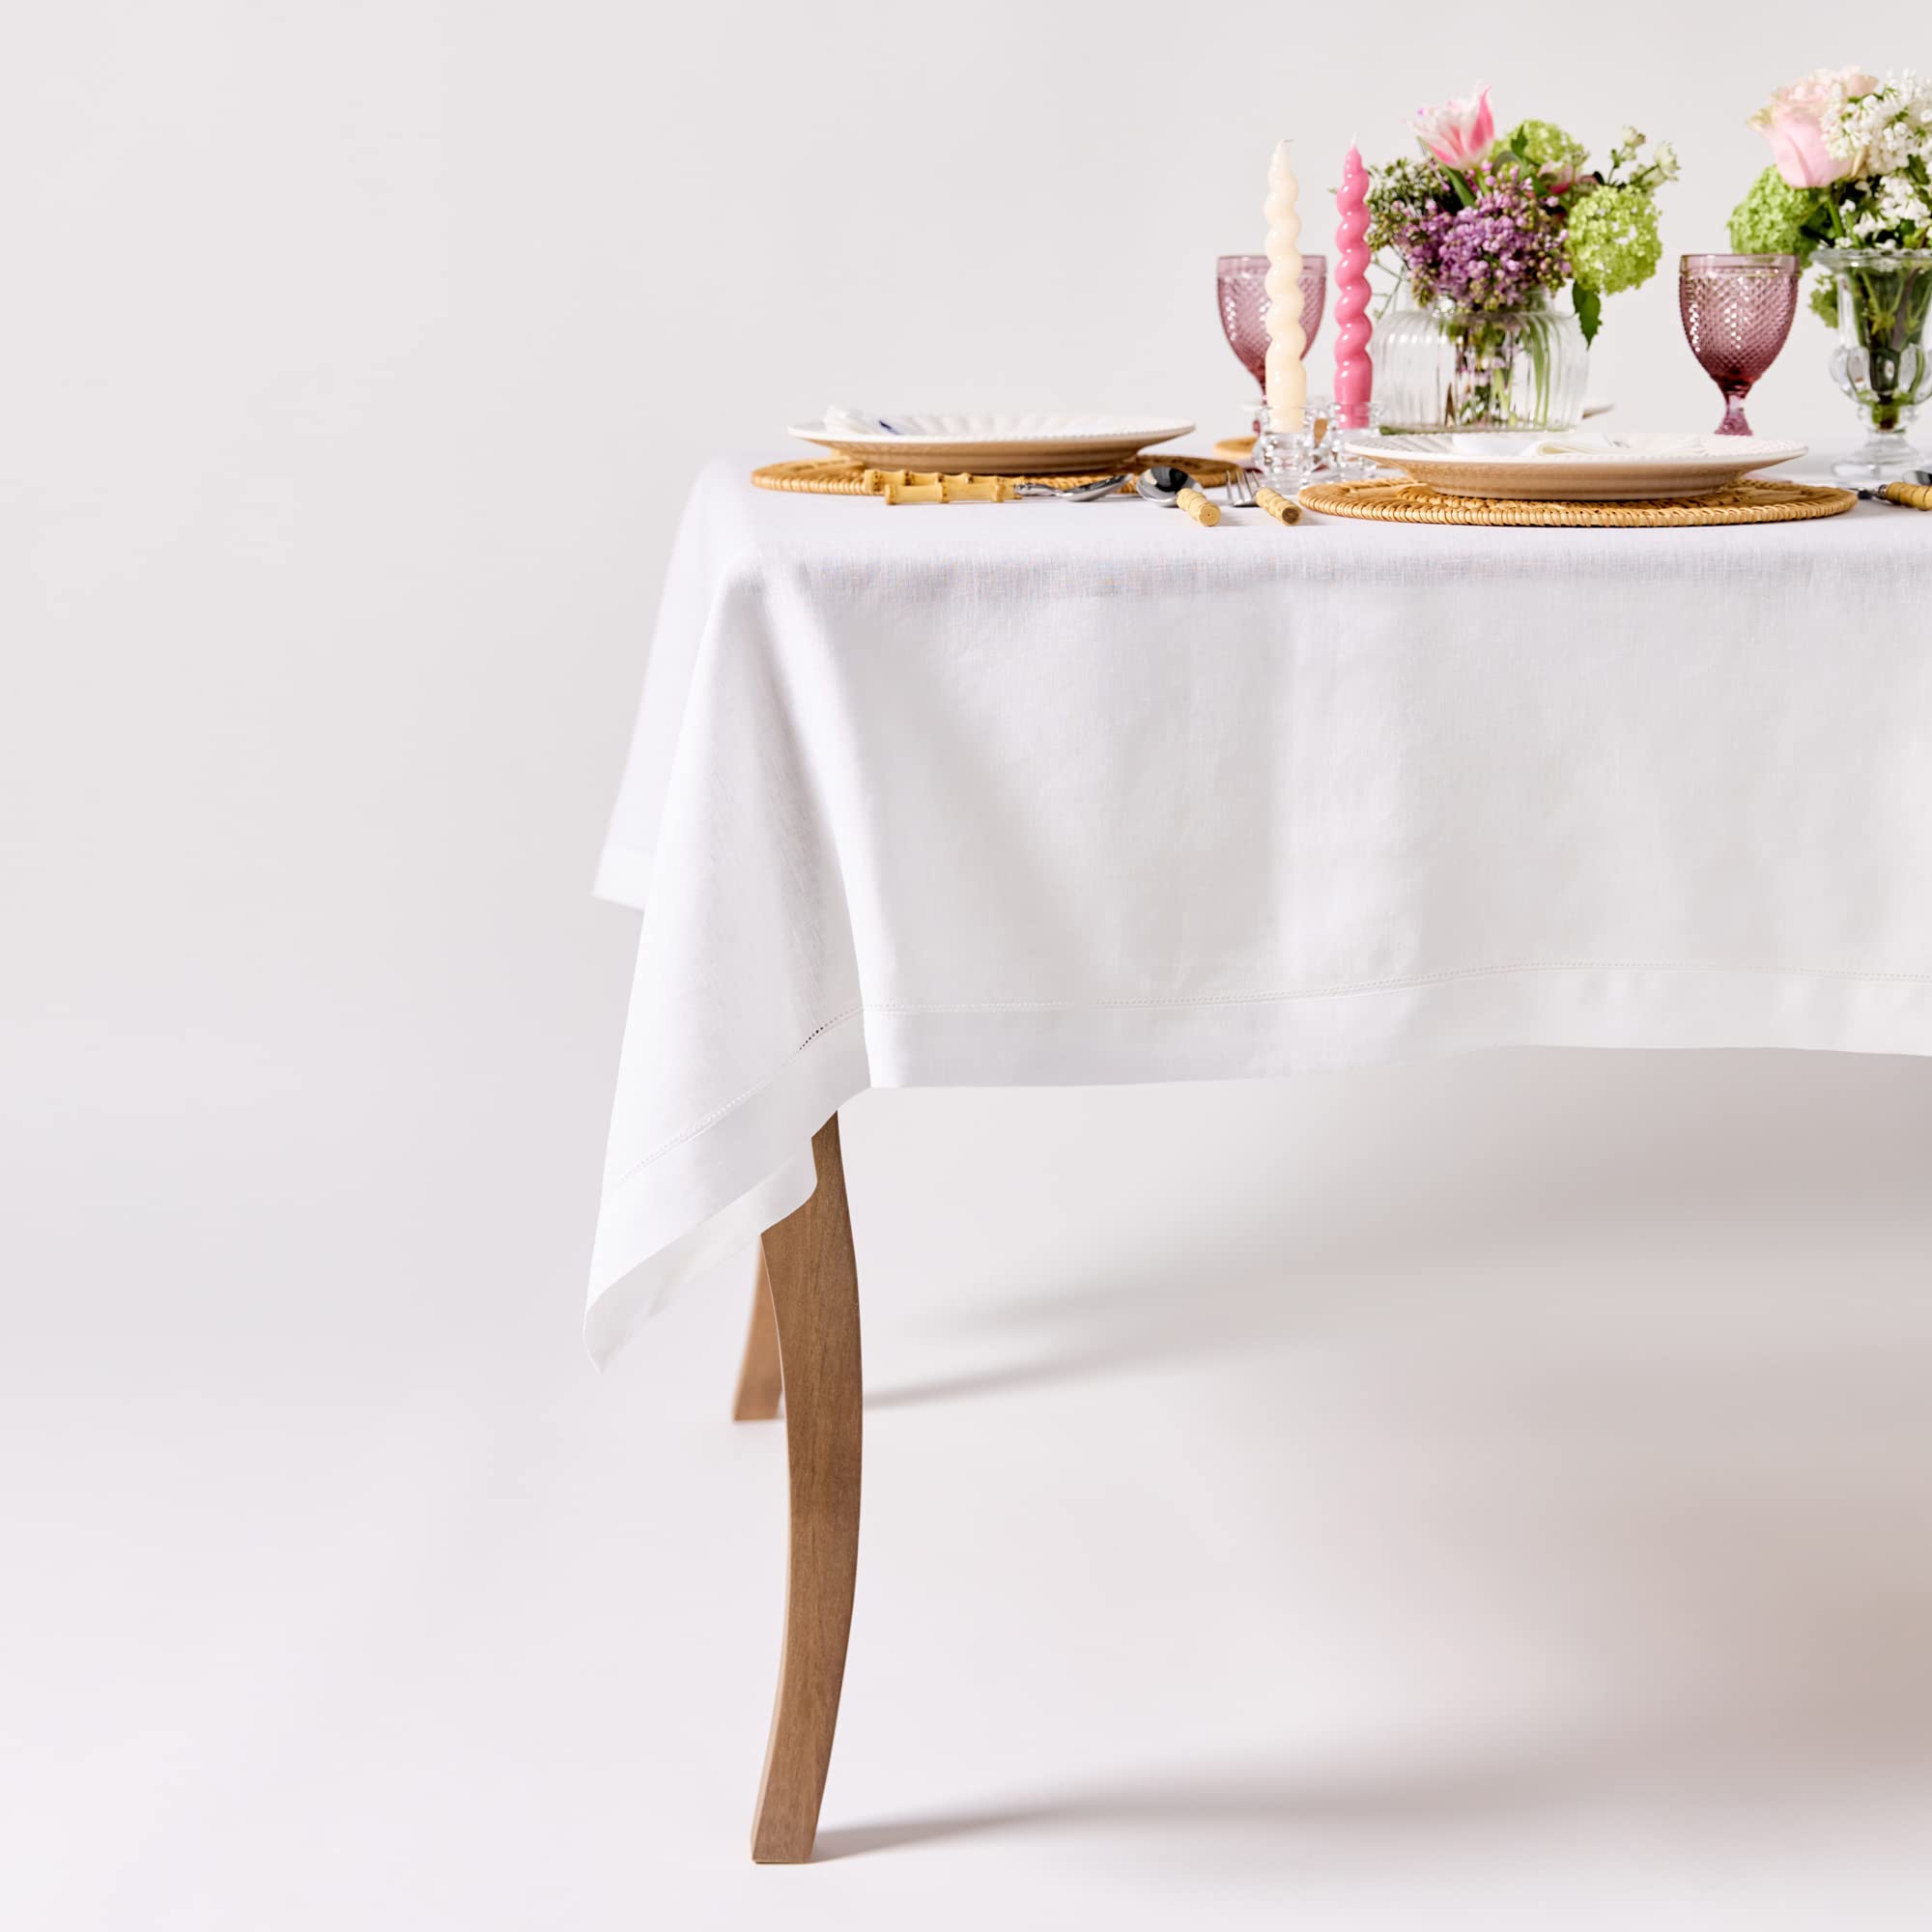 Linen tablecloth - 100% pure linen white tablecloth - Hemstitched edge white table cloth - 150 x 250cm for 6-8 seater table - By London brand, Clio and Clover